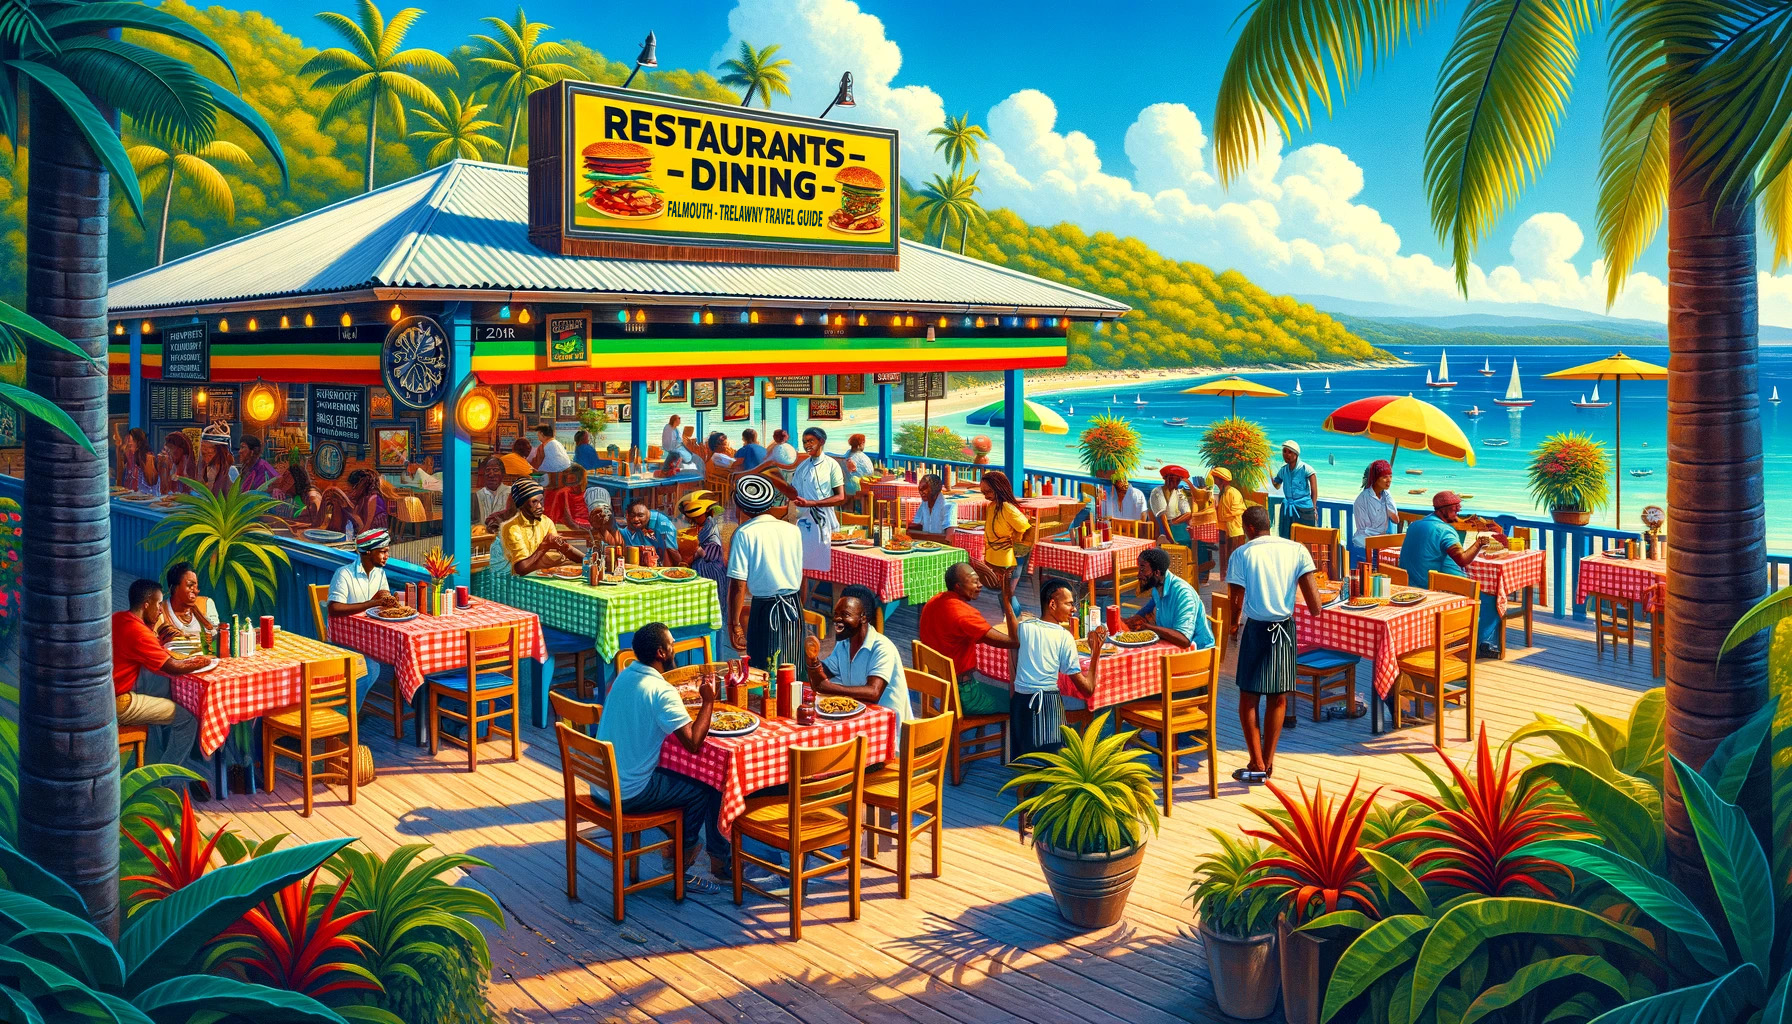 Restaurants - Dining - Falmouth - Trelawny Travel Guide